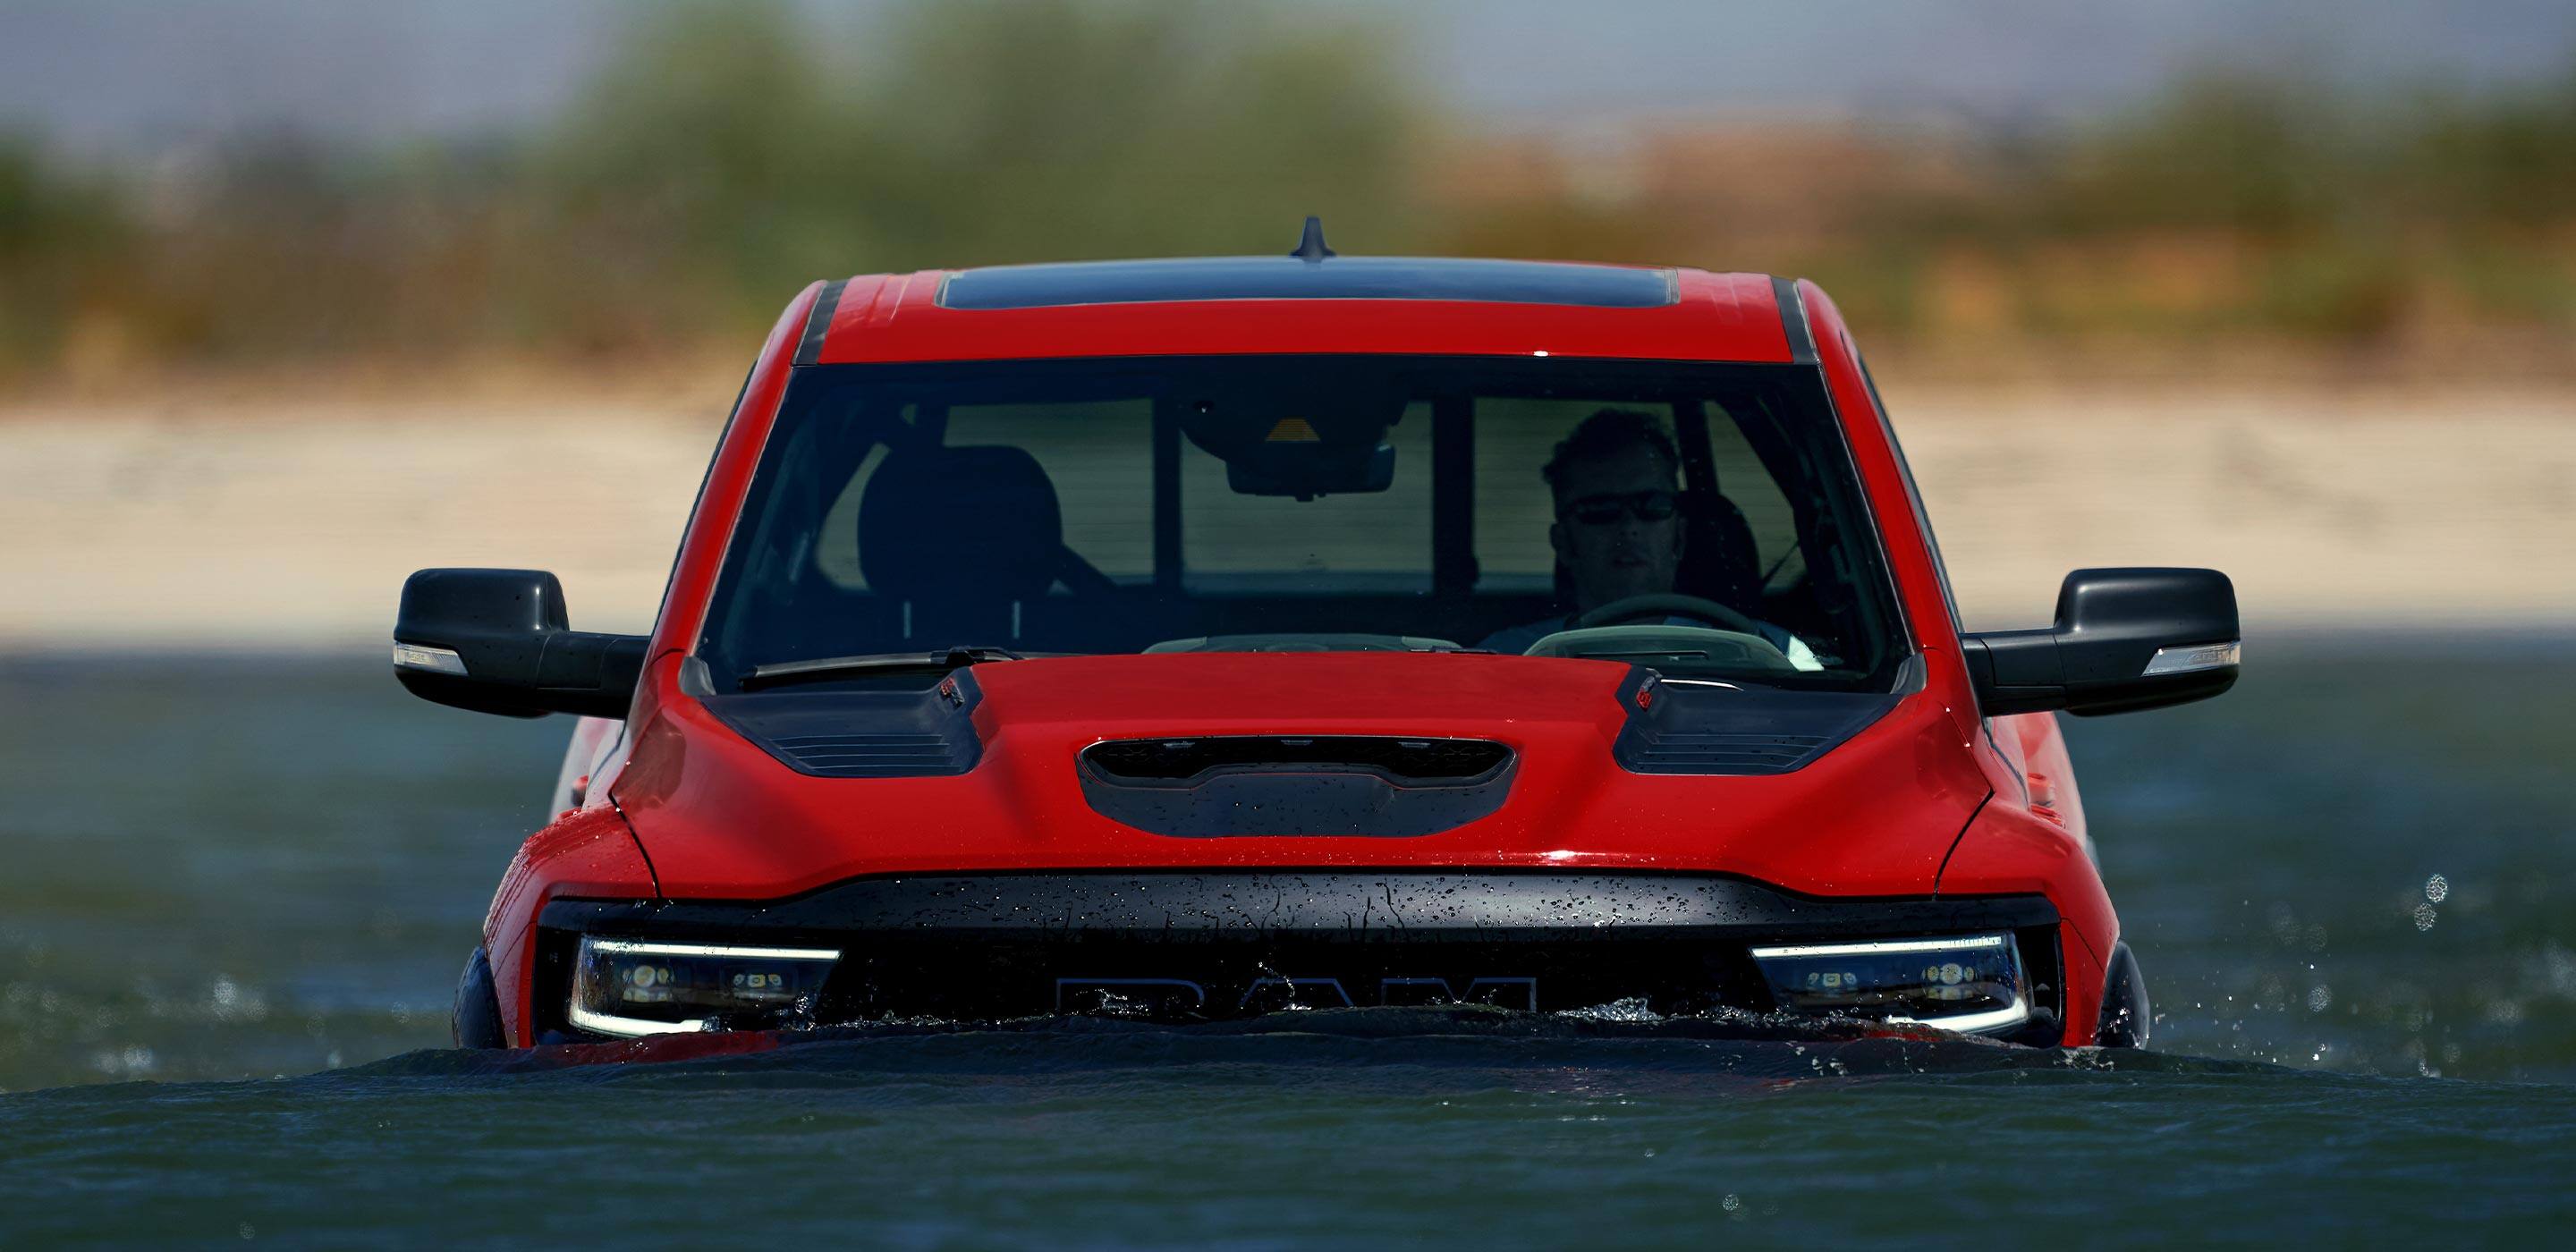 Display The 2022 Ram TRX fording through water that is near the top of the RAM lettering on the grille.